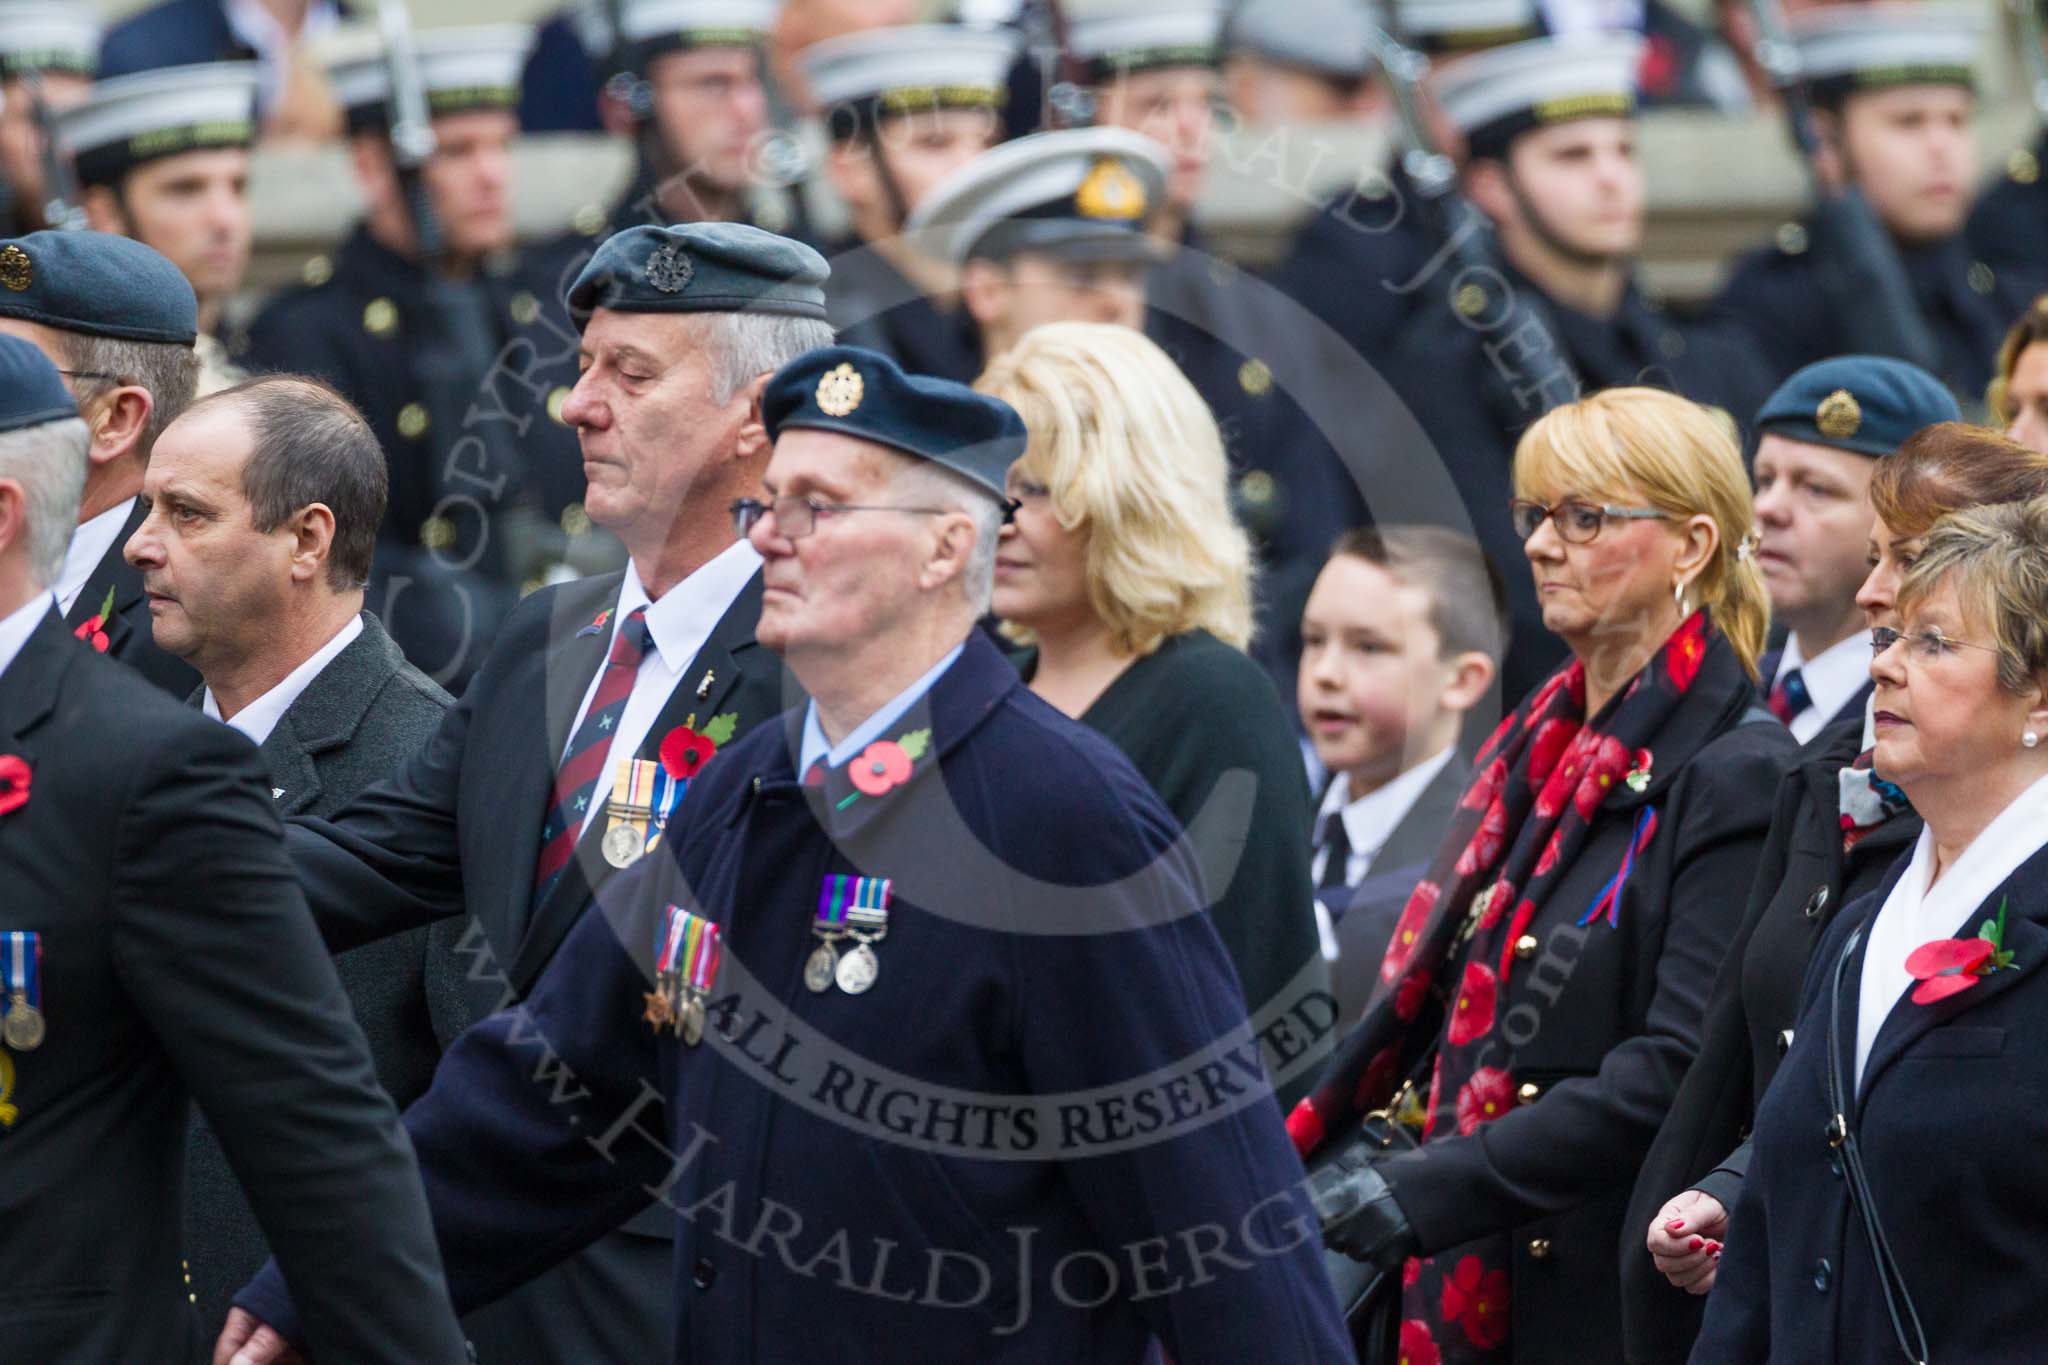 Remembrance Sunday at the Cenotaph 2015: C2, Royal Air Force Regiment Association.
Cenotaph, Whitehall, London SW1,
London,
Greater London,
United Kingdom,
on 08 November 2015 at 11:47, image #432